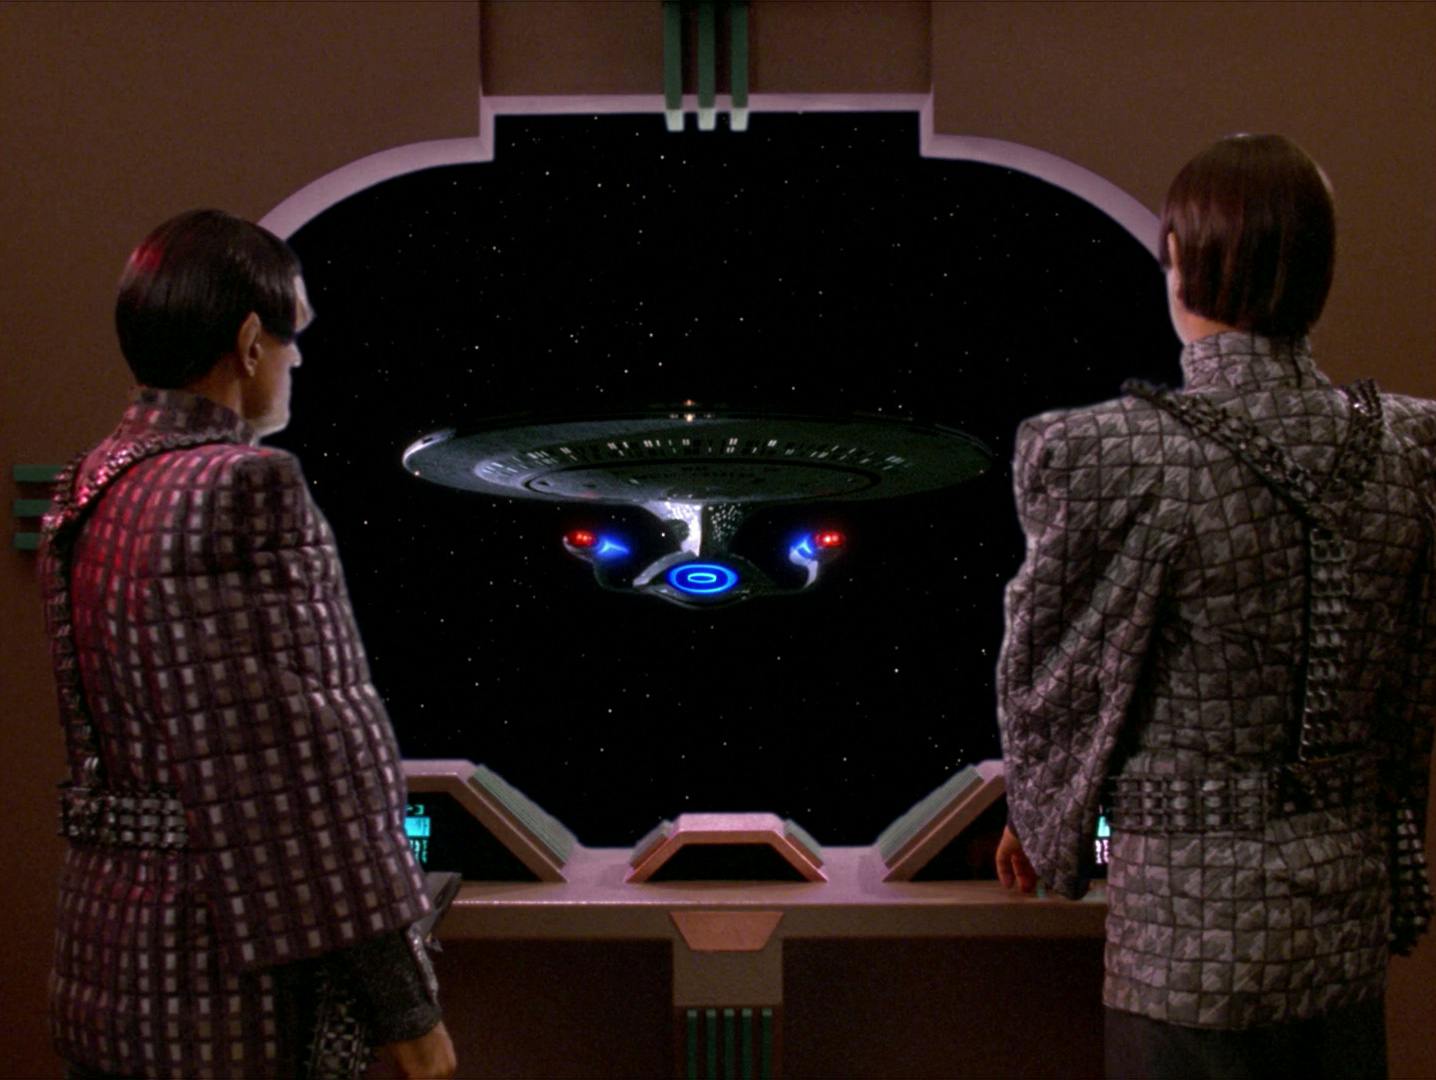 Subcommander N'Vek and Deanna Troi posing as Major Rakal of the Tal Shiar look out the viewfinder of the Romulan warbird Kazara to face the Enterprise-D in 'Face of the Enemy'